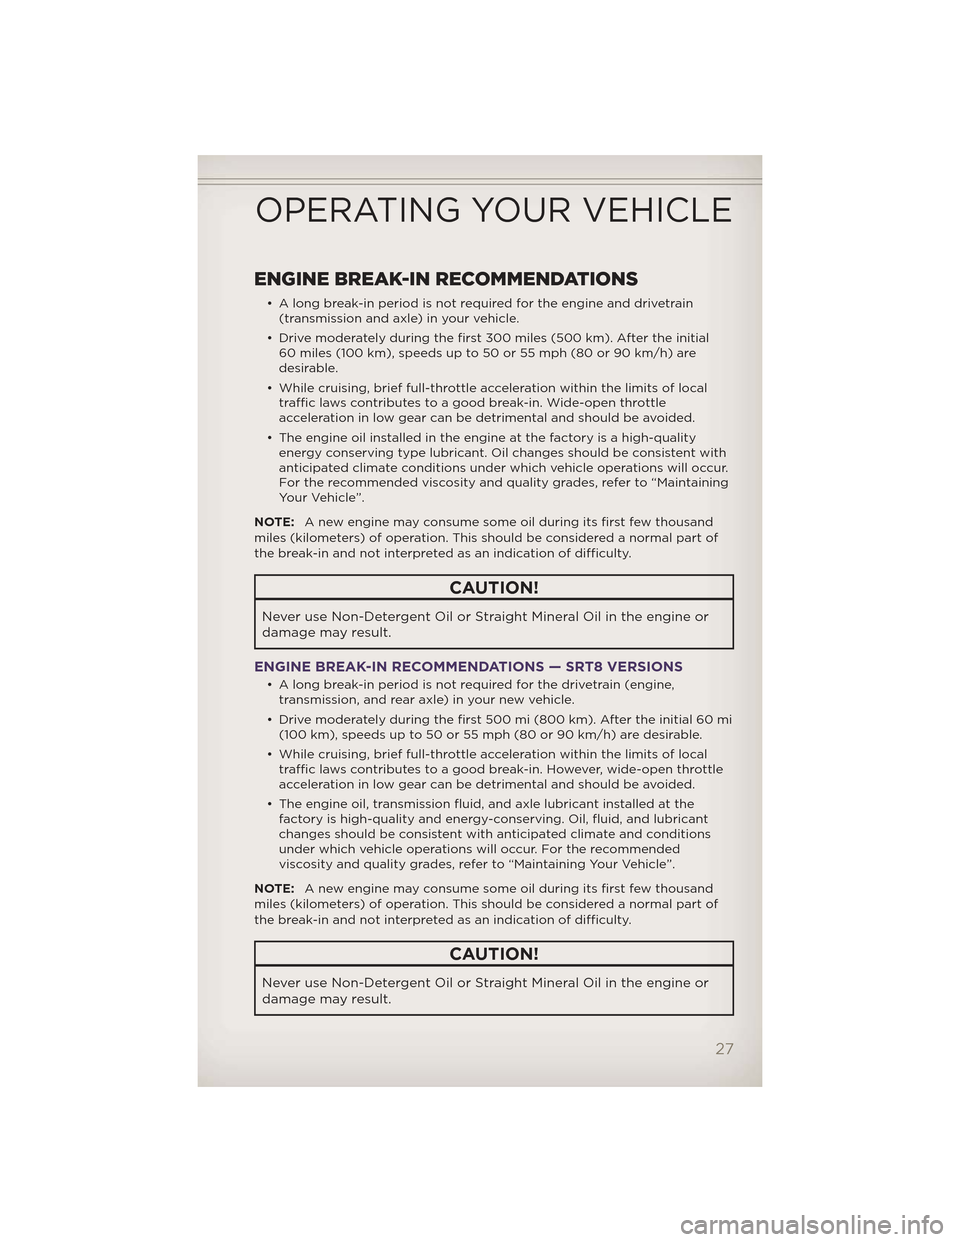 JEEP GRAND CHEROKEE 2012 WK2 / 4.G User Guide ENGINE BREAK-IN RECOMMENDATIONS
• A long break-in period is not required for the engine and drivetrain(transmission and axle) in your vehicle.
• Drive moderately during the first 300 miles (500 km